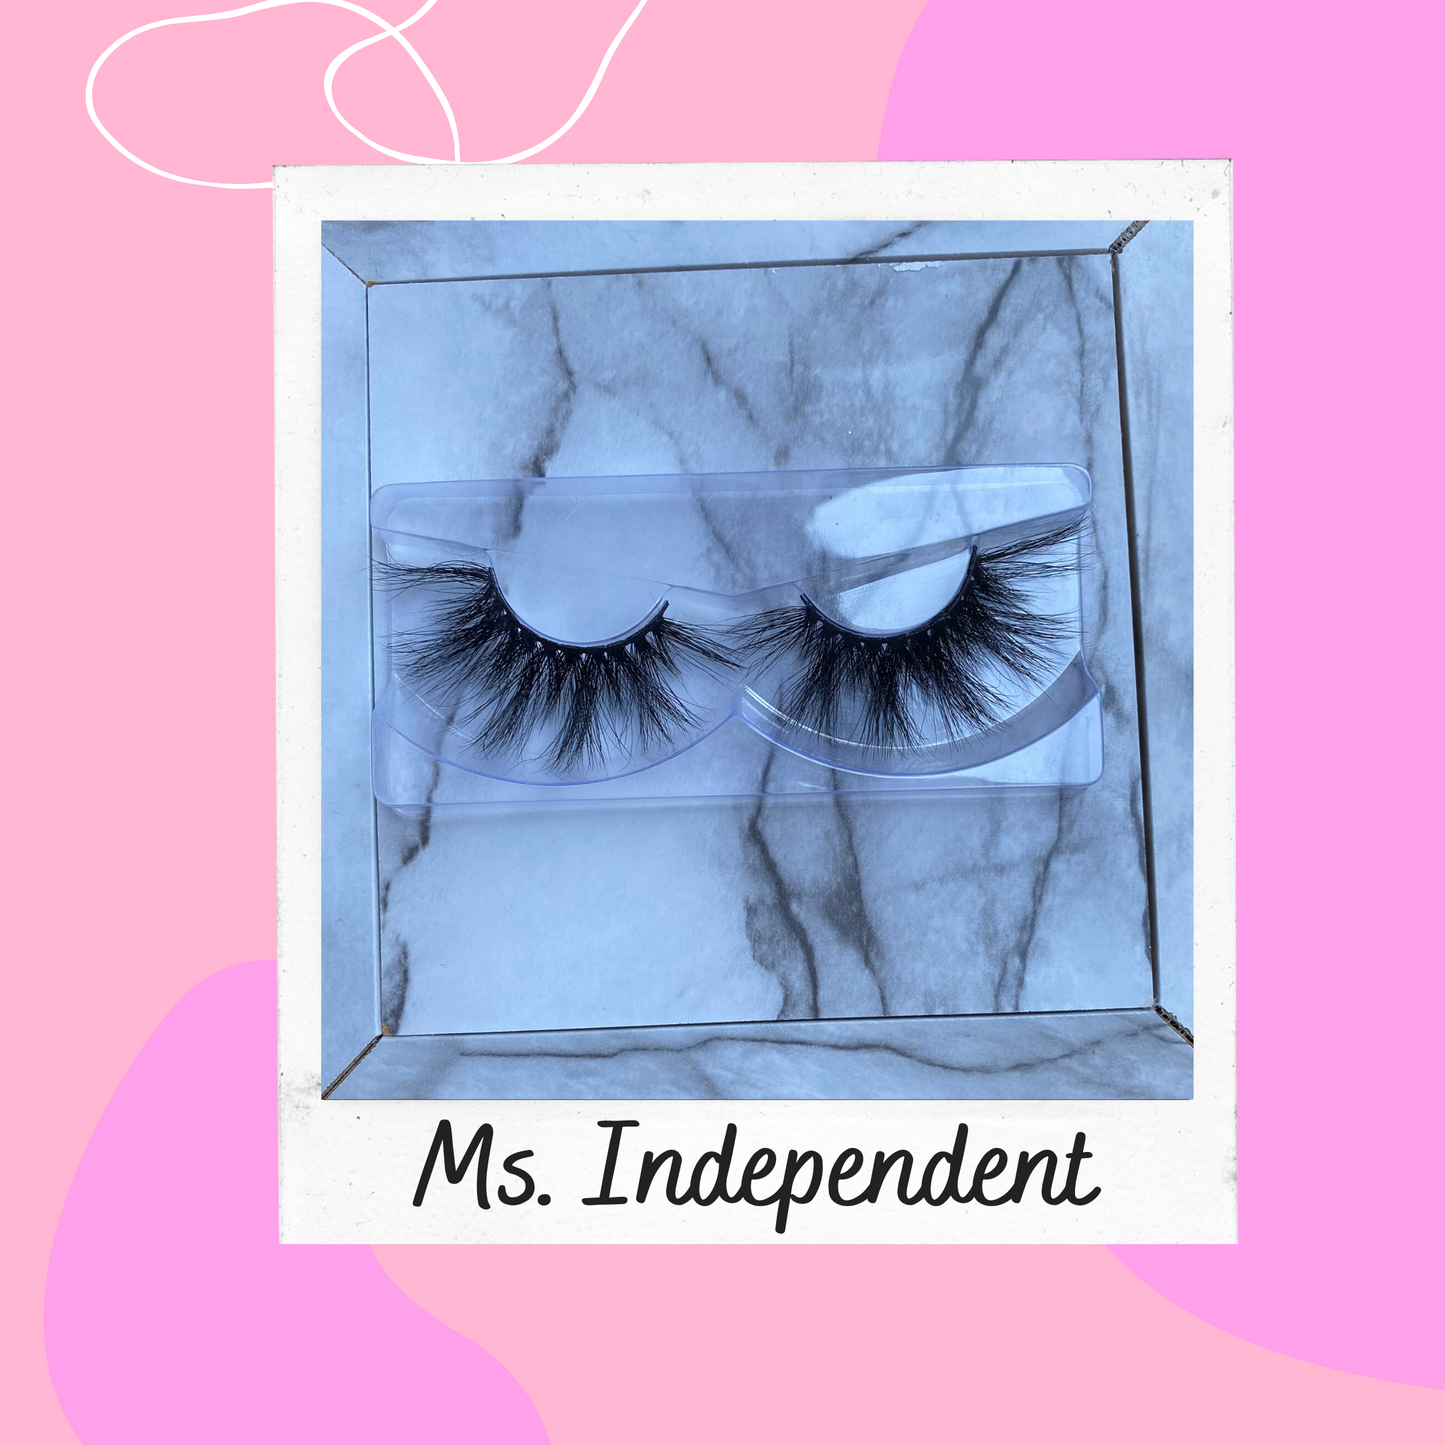 Ms. Independent